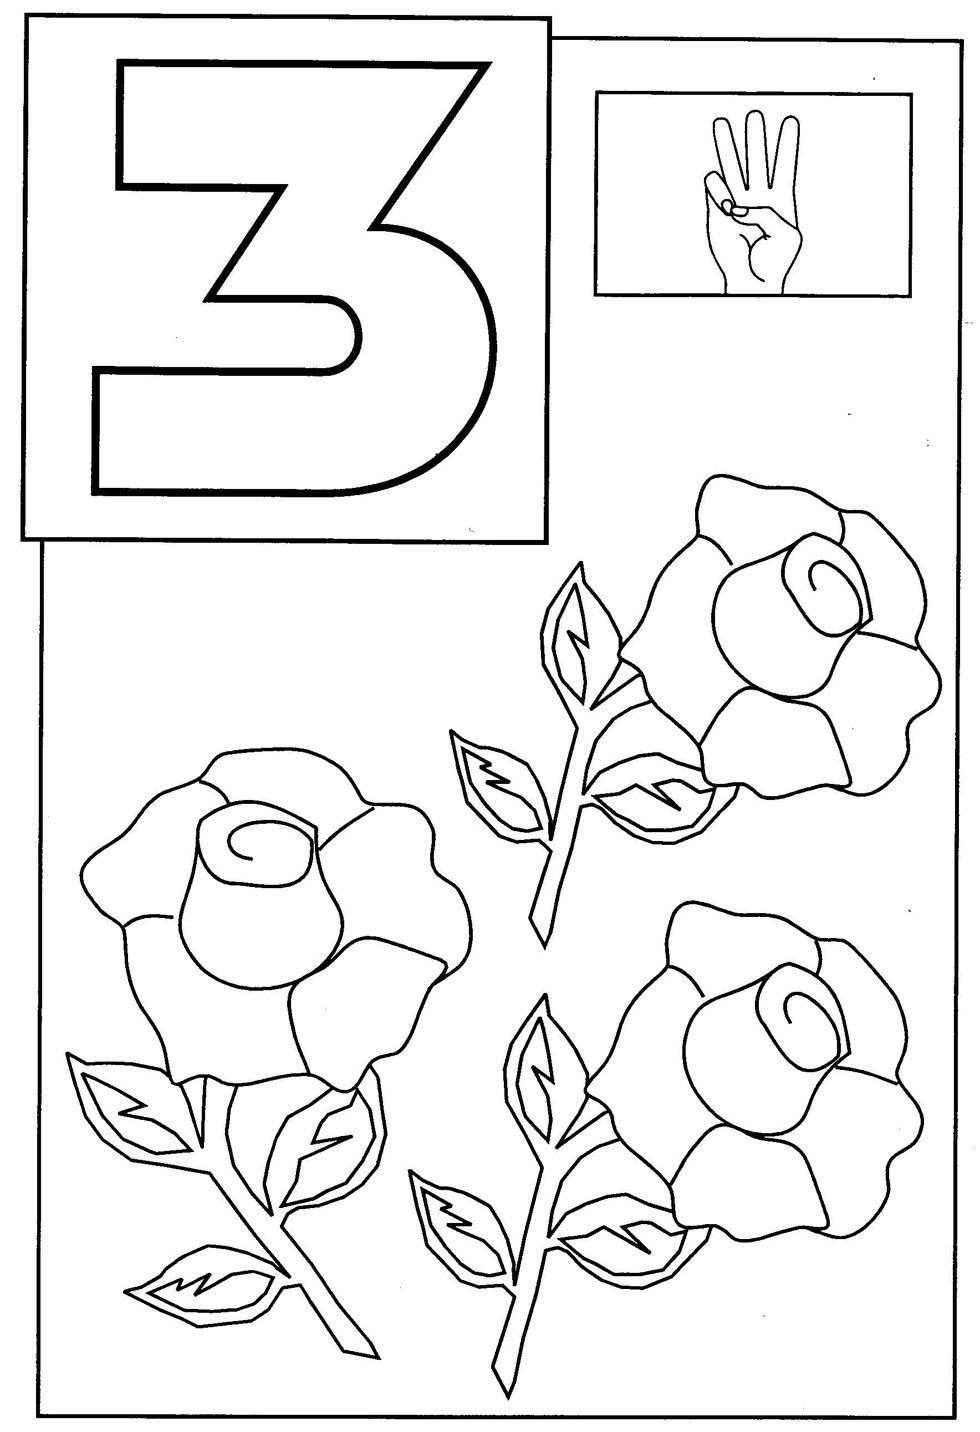 Number Coloring Pages for Toddlers #7191 Coloring Pages for ...